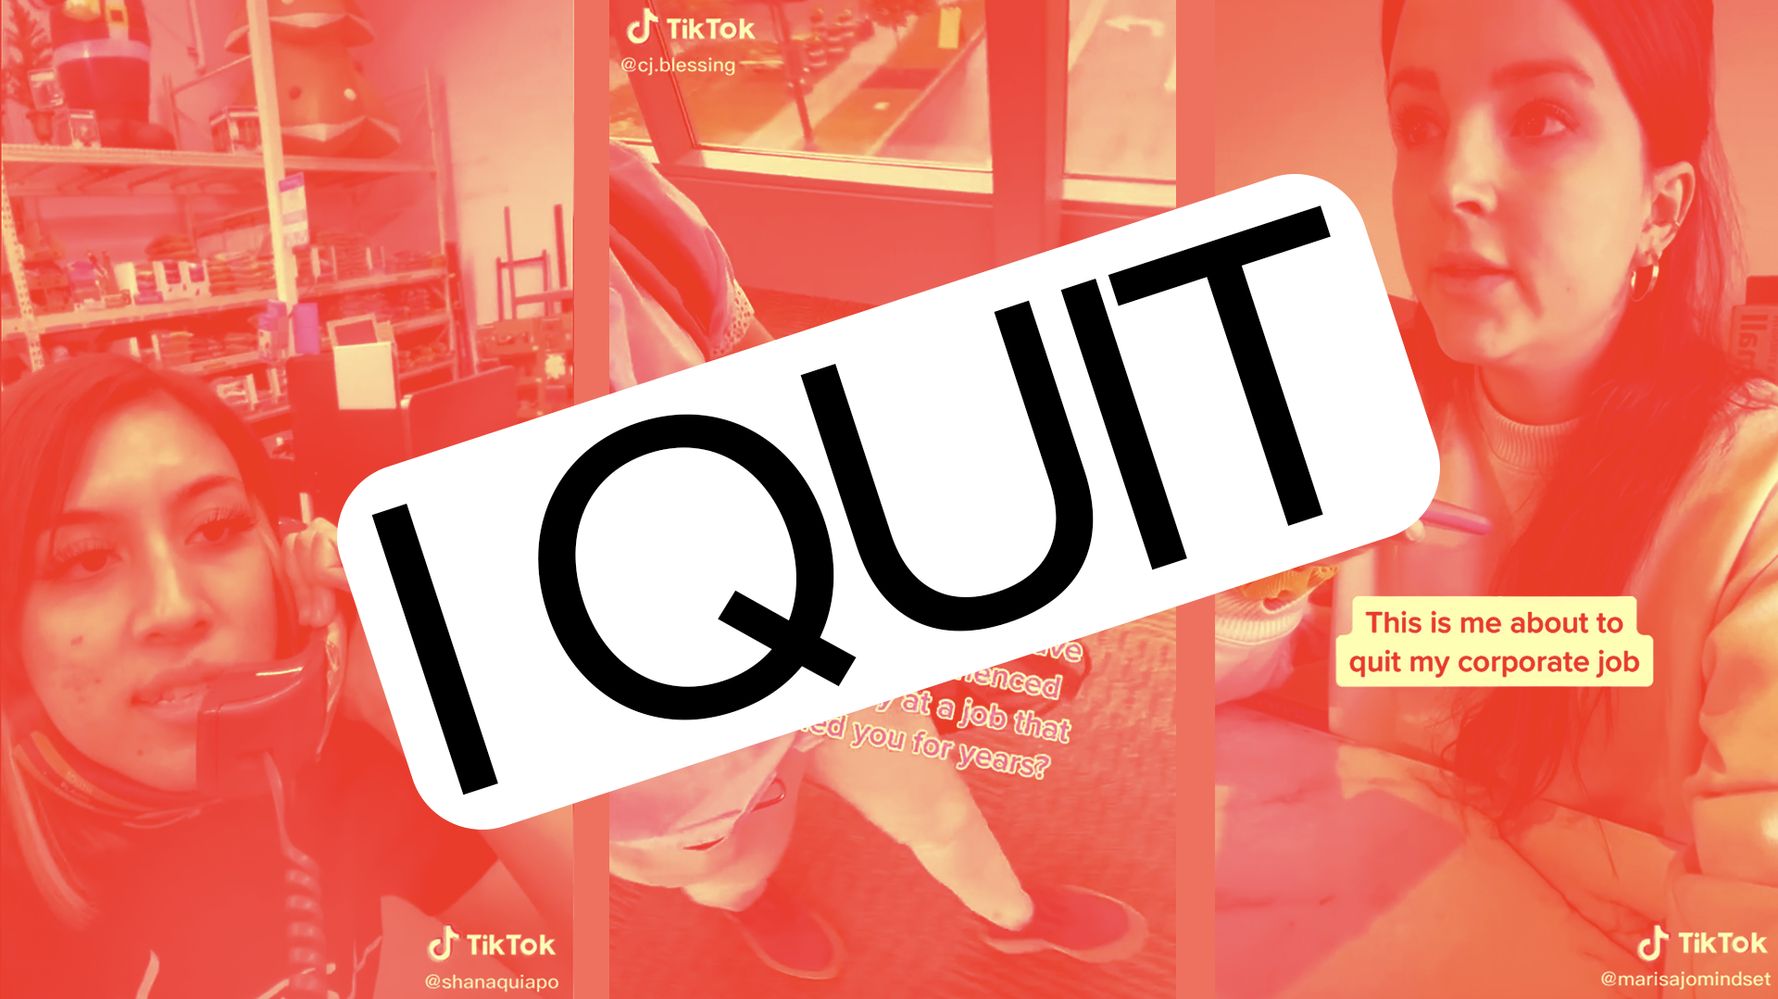 30 People Who Quit Their Miserable Jobs Share If They Regret Doing